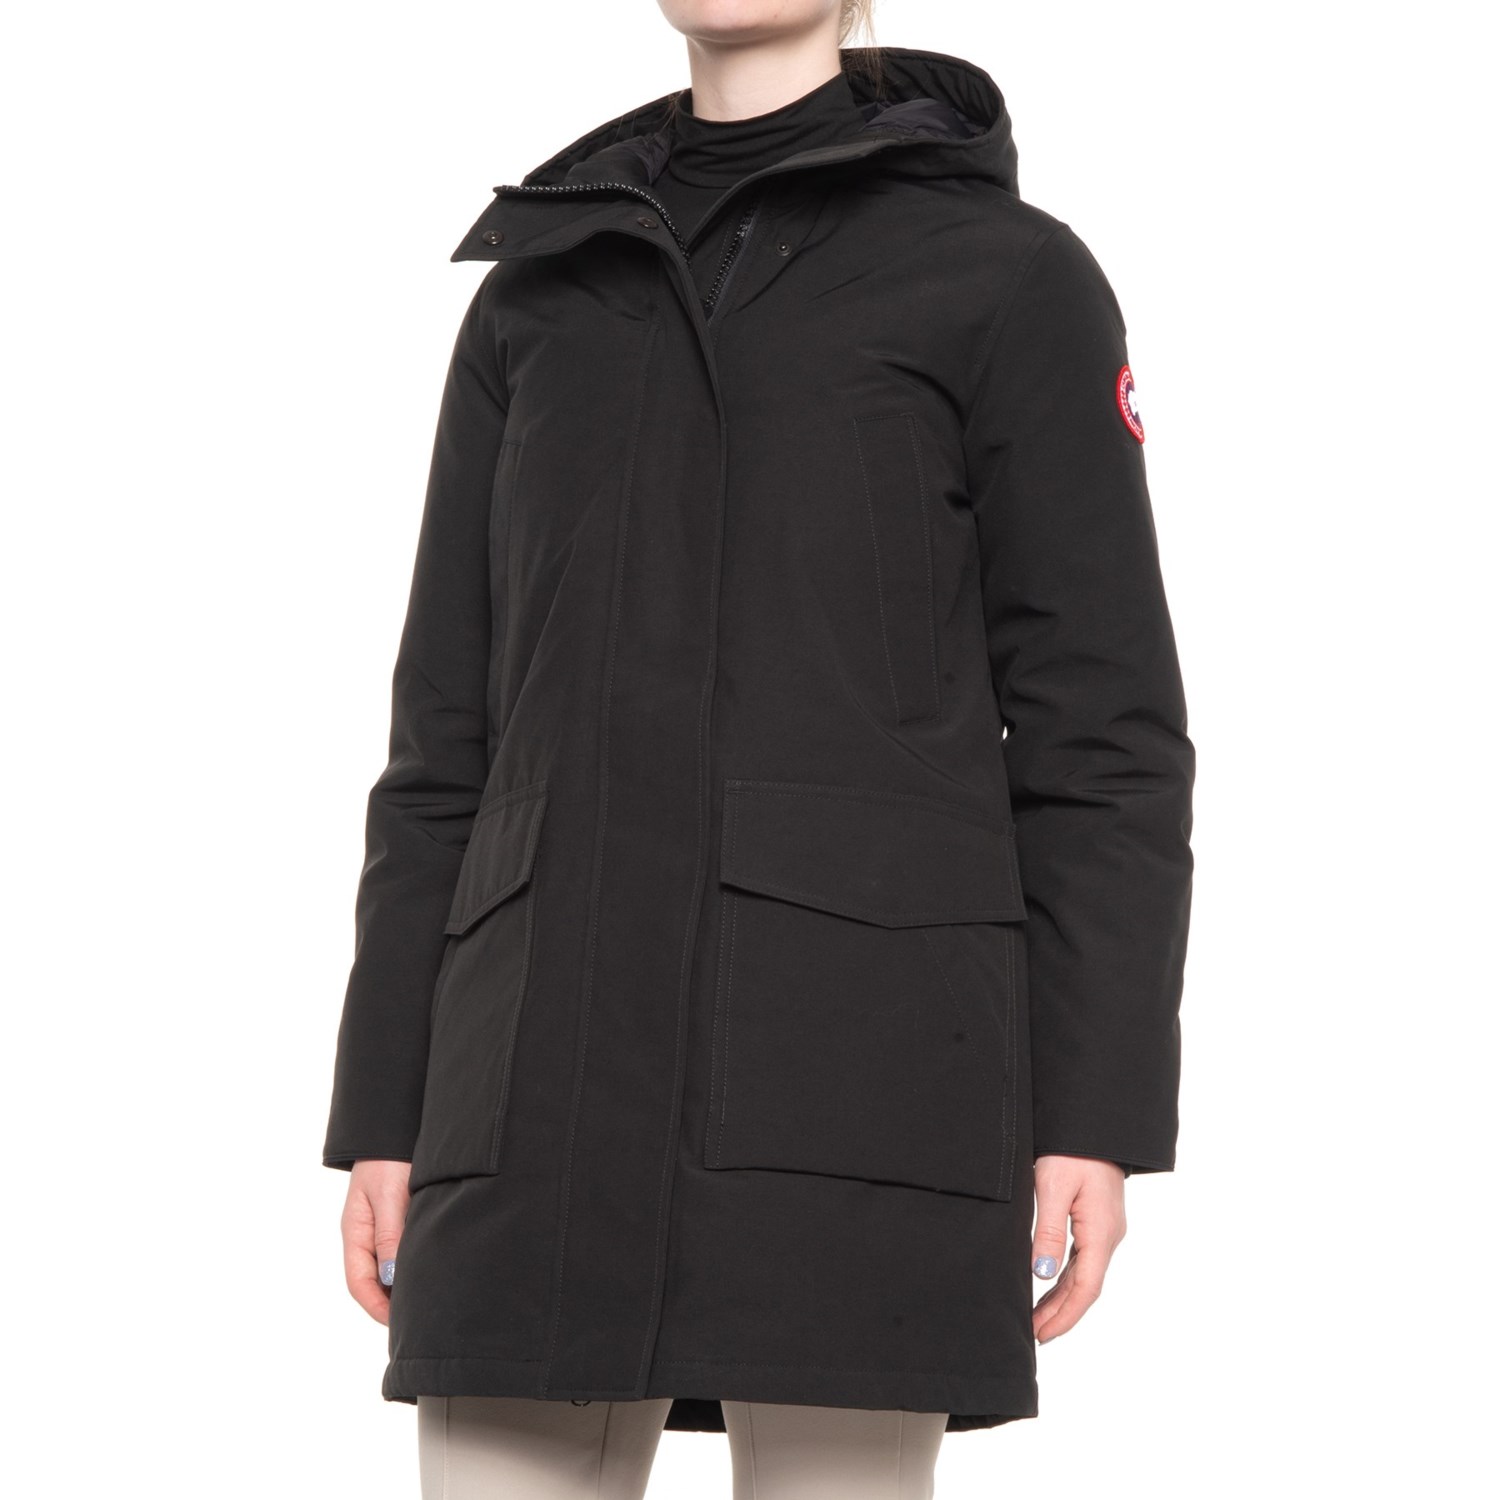 Canada Goose Canmore Parka - 675 Fill Power (For Women)